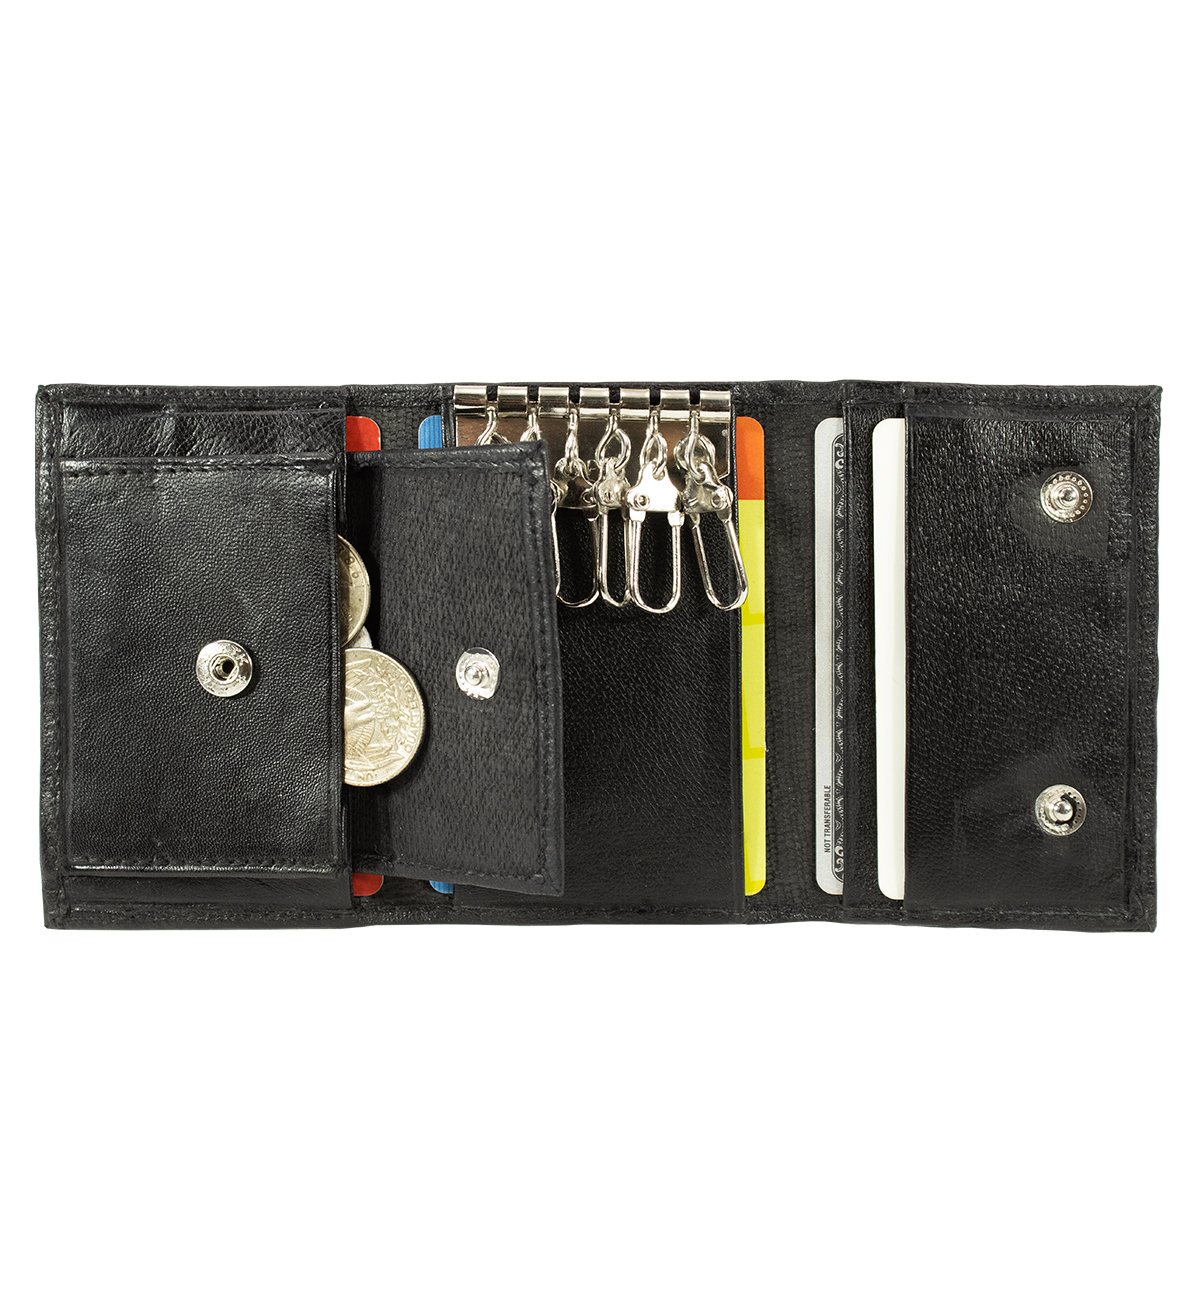 Trifold Coin Purse With Keychains & Coin Pocket - #KP-215